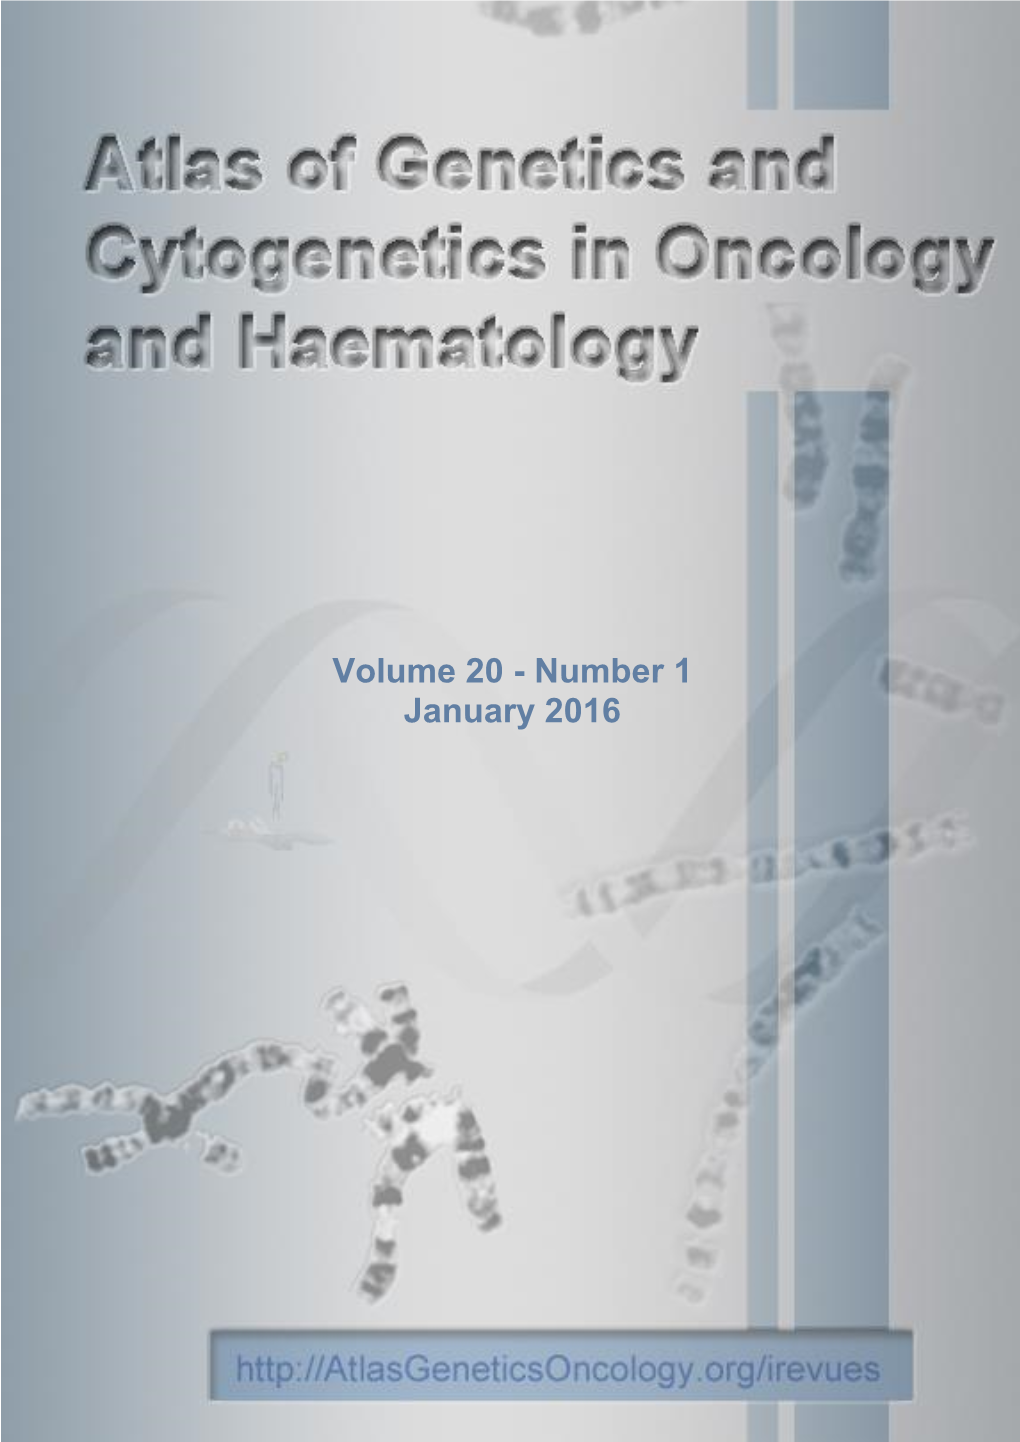 Number 1 January 2016 Atlas of Genetics and Cytogenetics in Oncology and Haematology